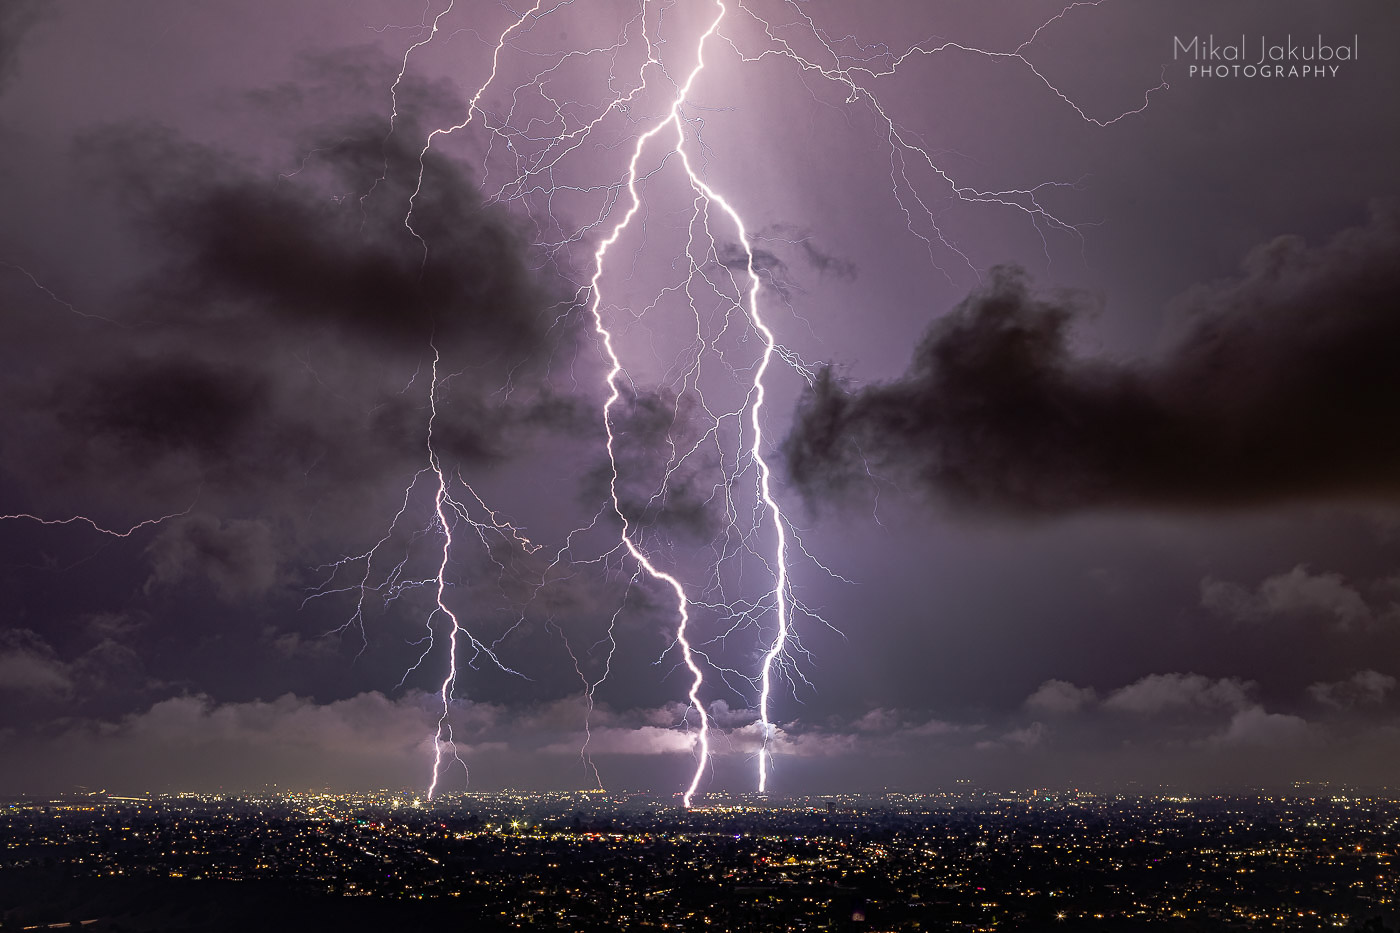 Three gigantic purple lightning bolts drop vertically down onto the city of San Diego at night.